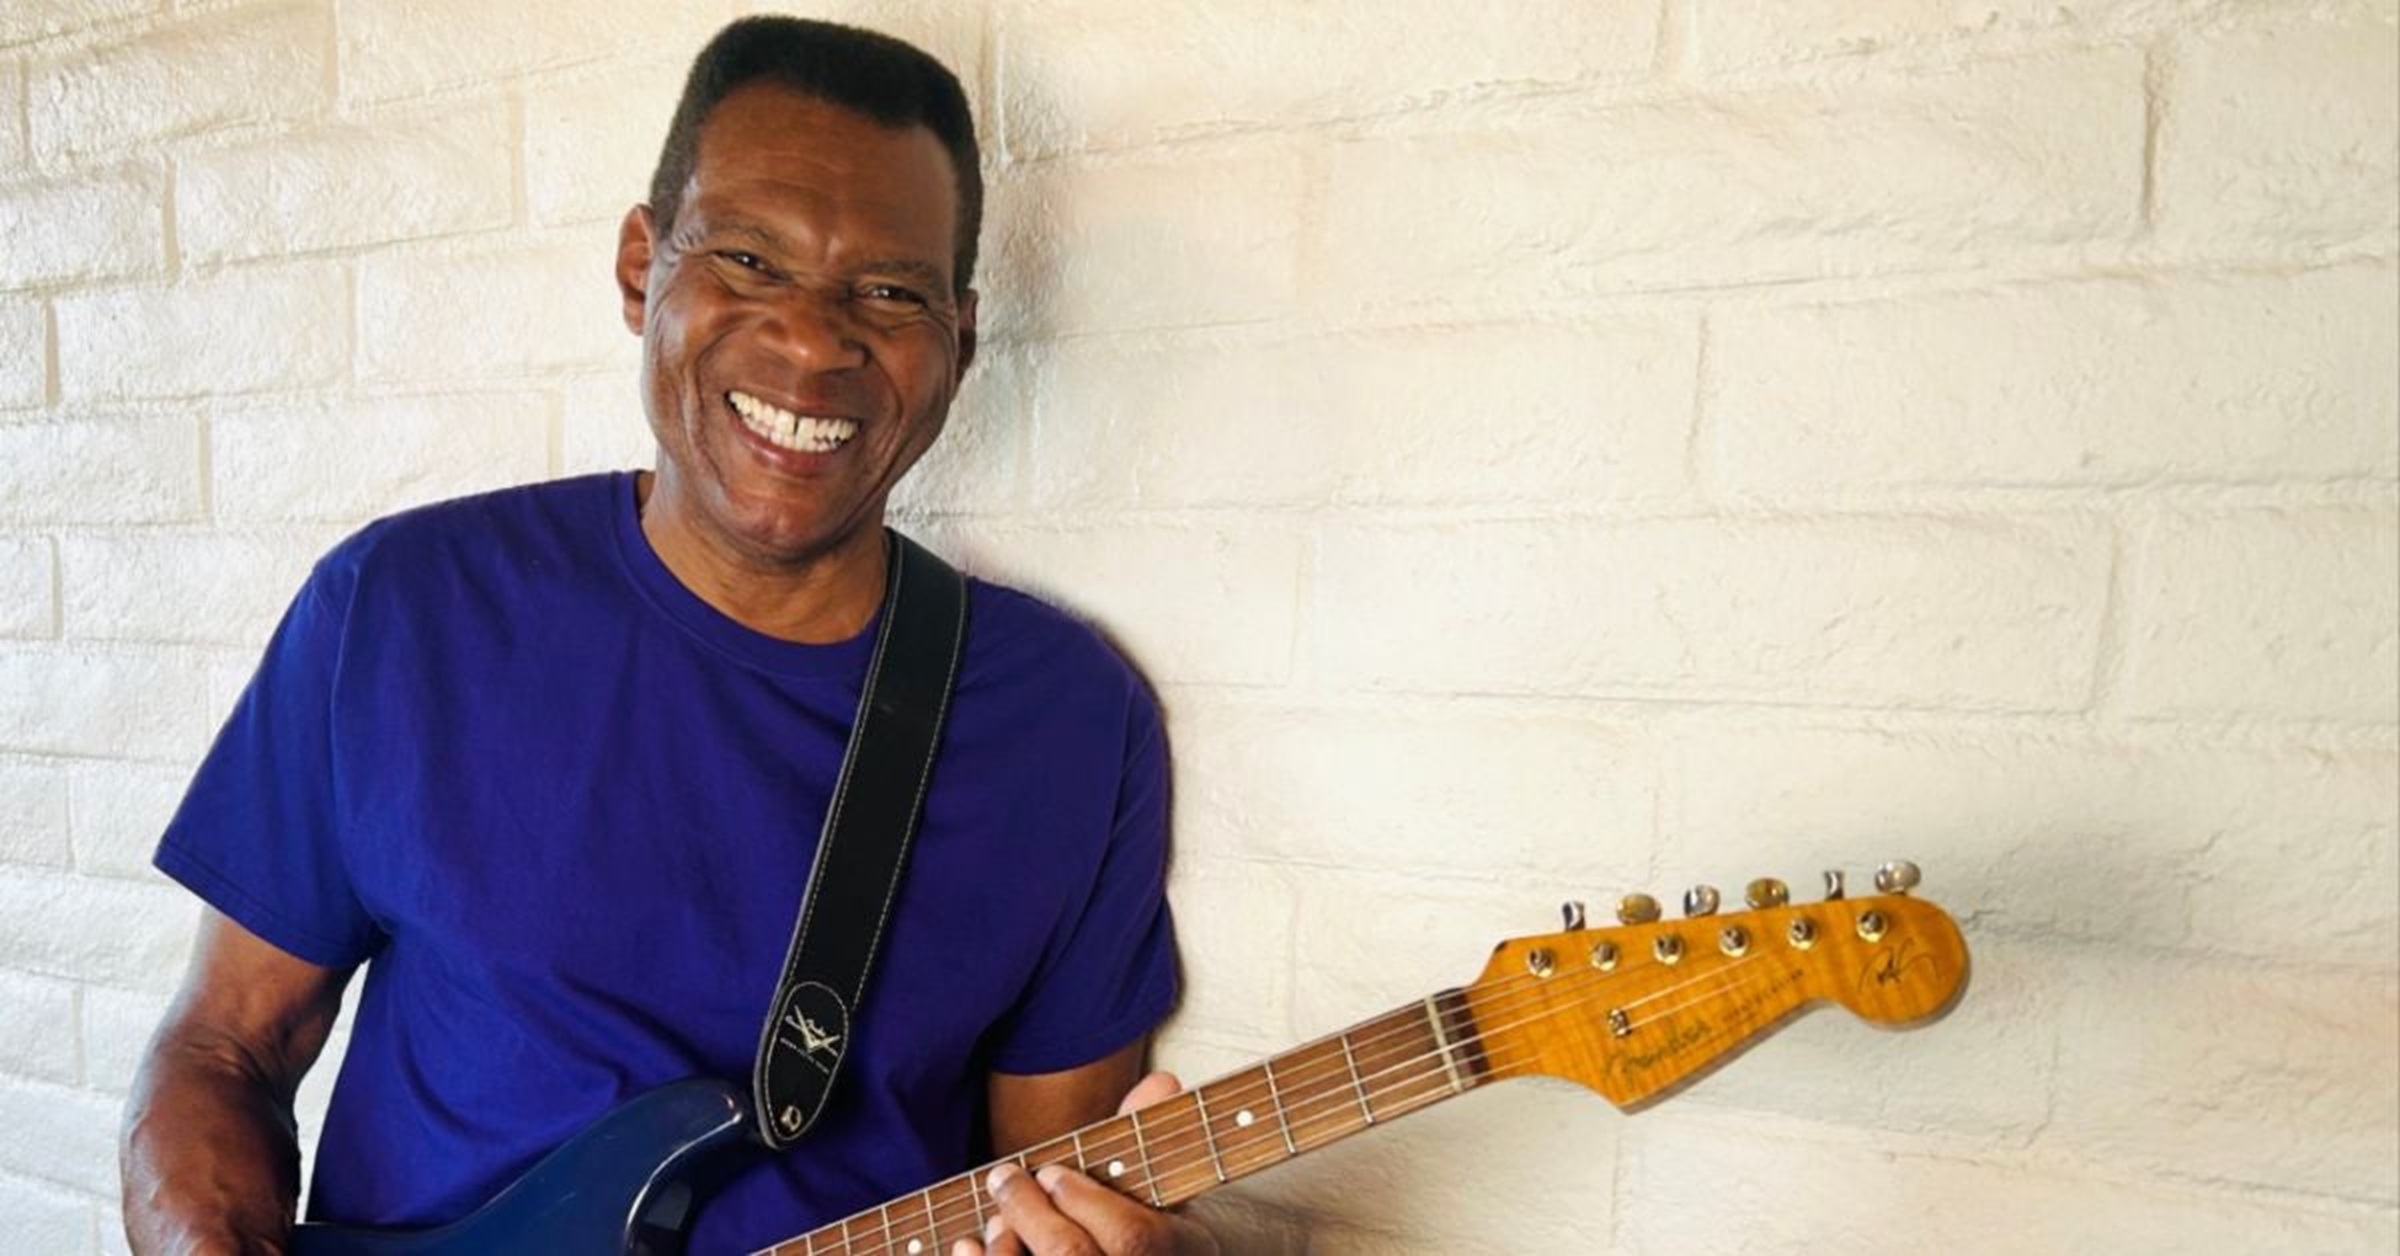 Z2 ENTERTAINMENT & 97.3 KBCO PRESENT: THE ROBERT CRAY BAND GROOVIN’ FOR 50 YEARS